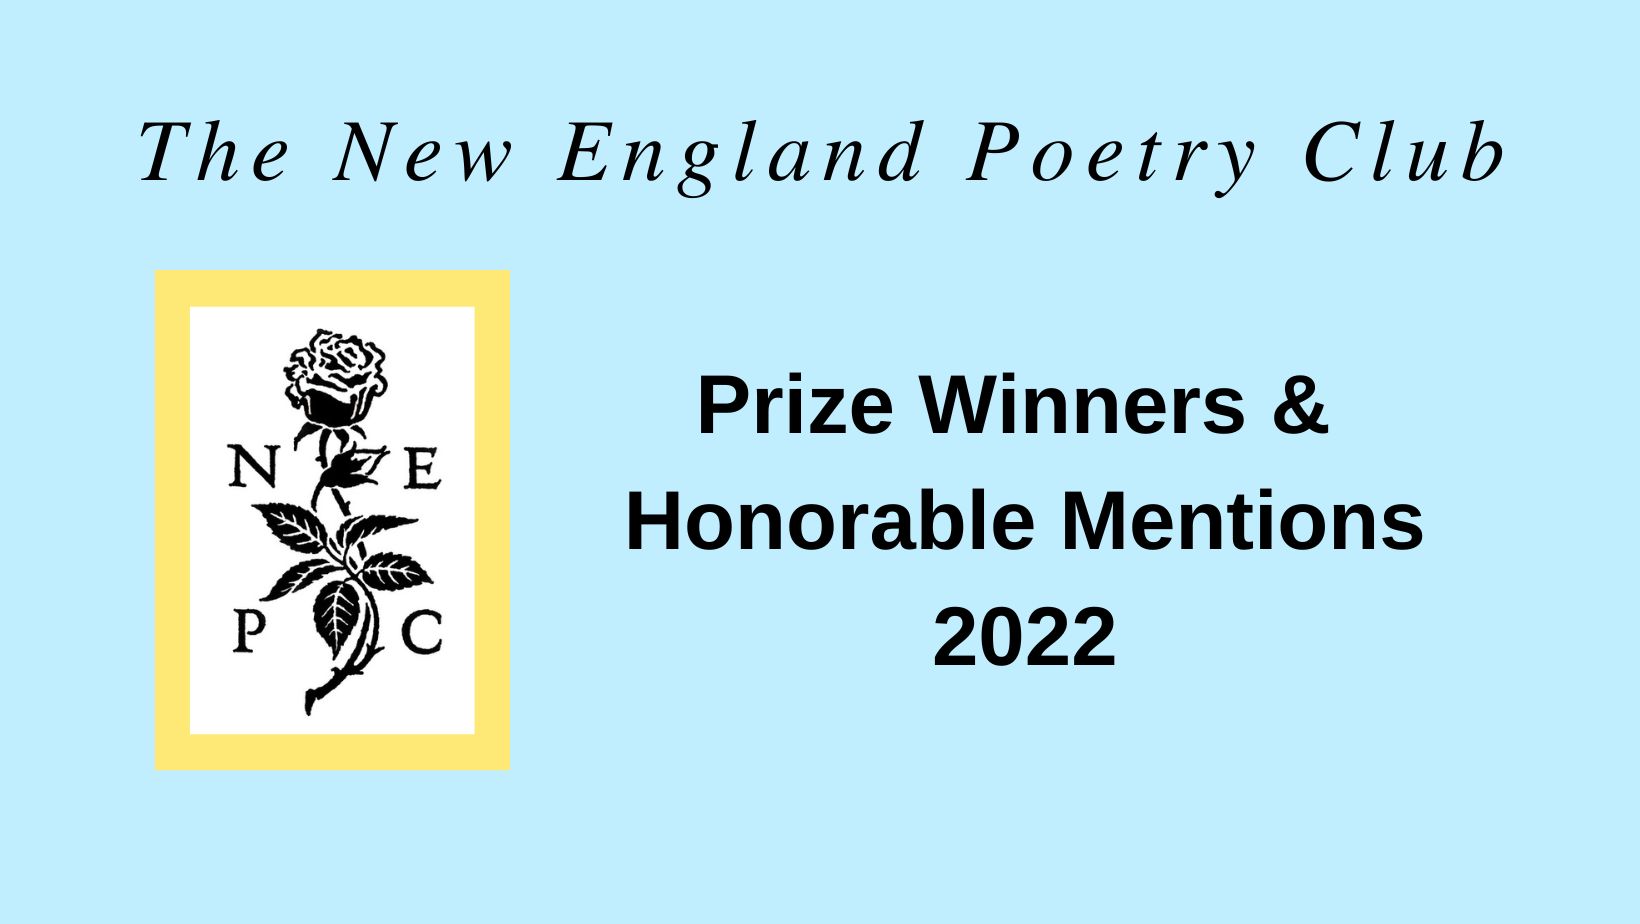 Congratulations to our 2022 Prize Winners and Honorable Mentions